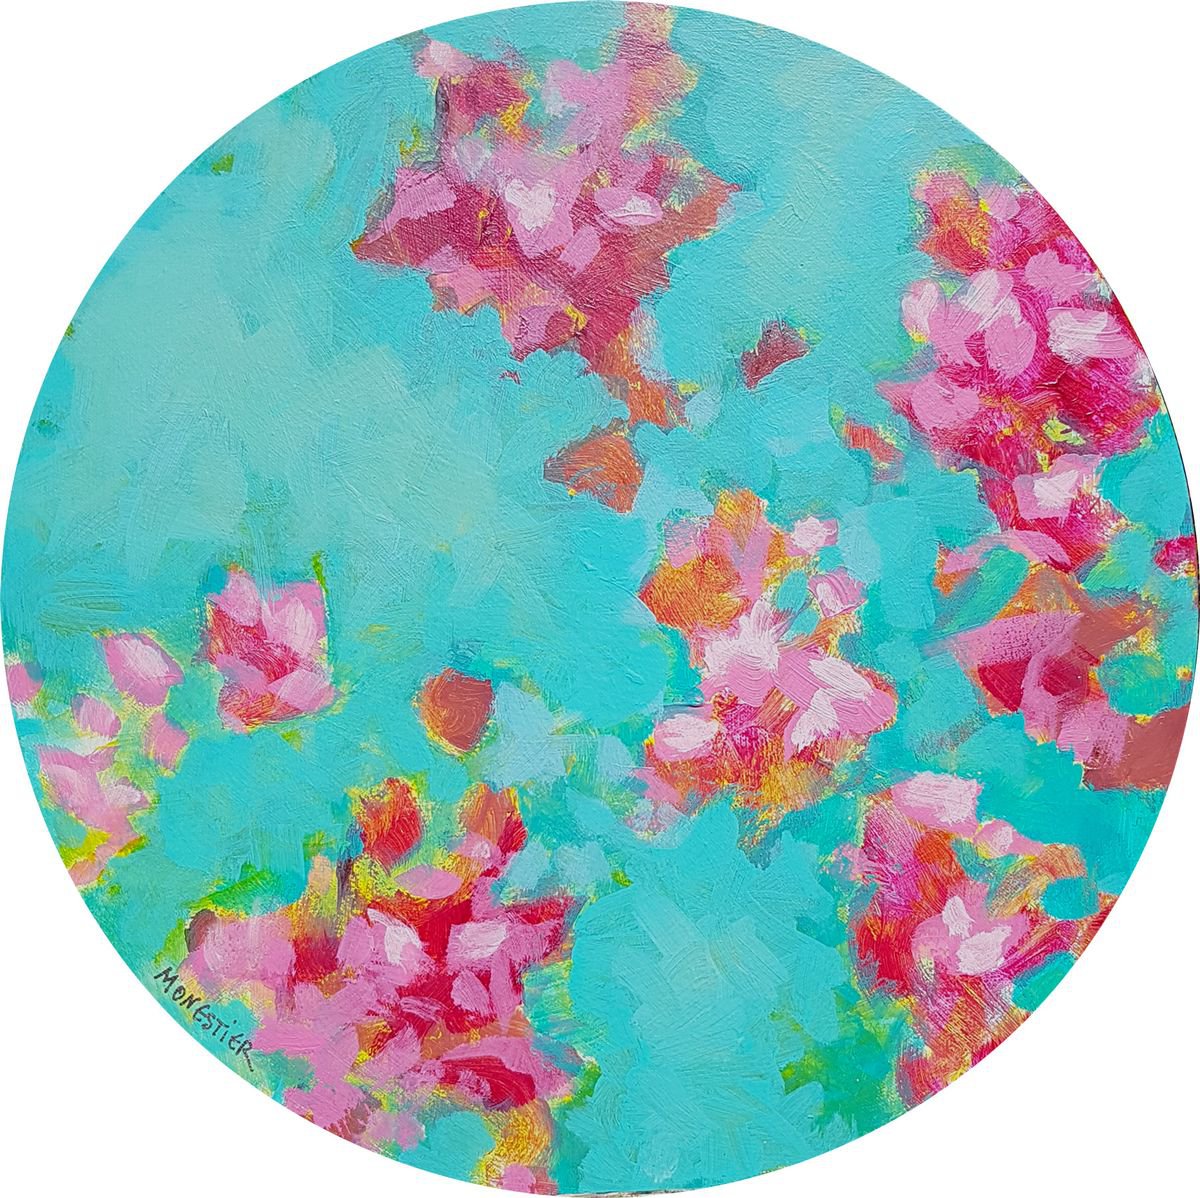 Approach of love, a floral poetry on round canvas by Fabienne Monestier